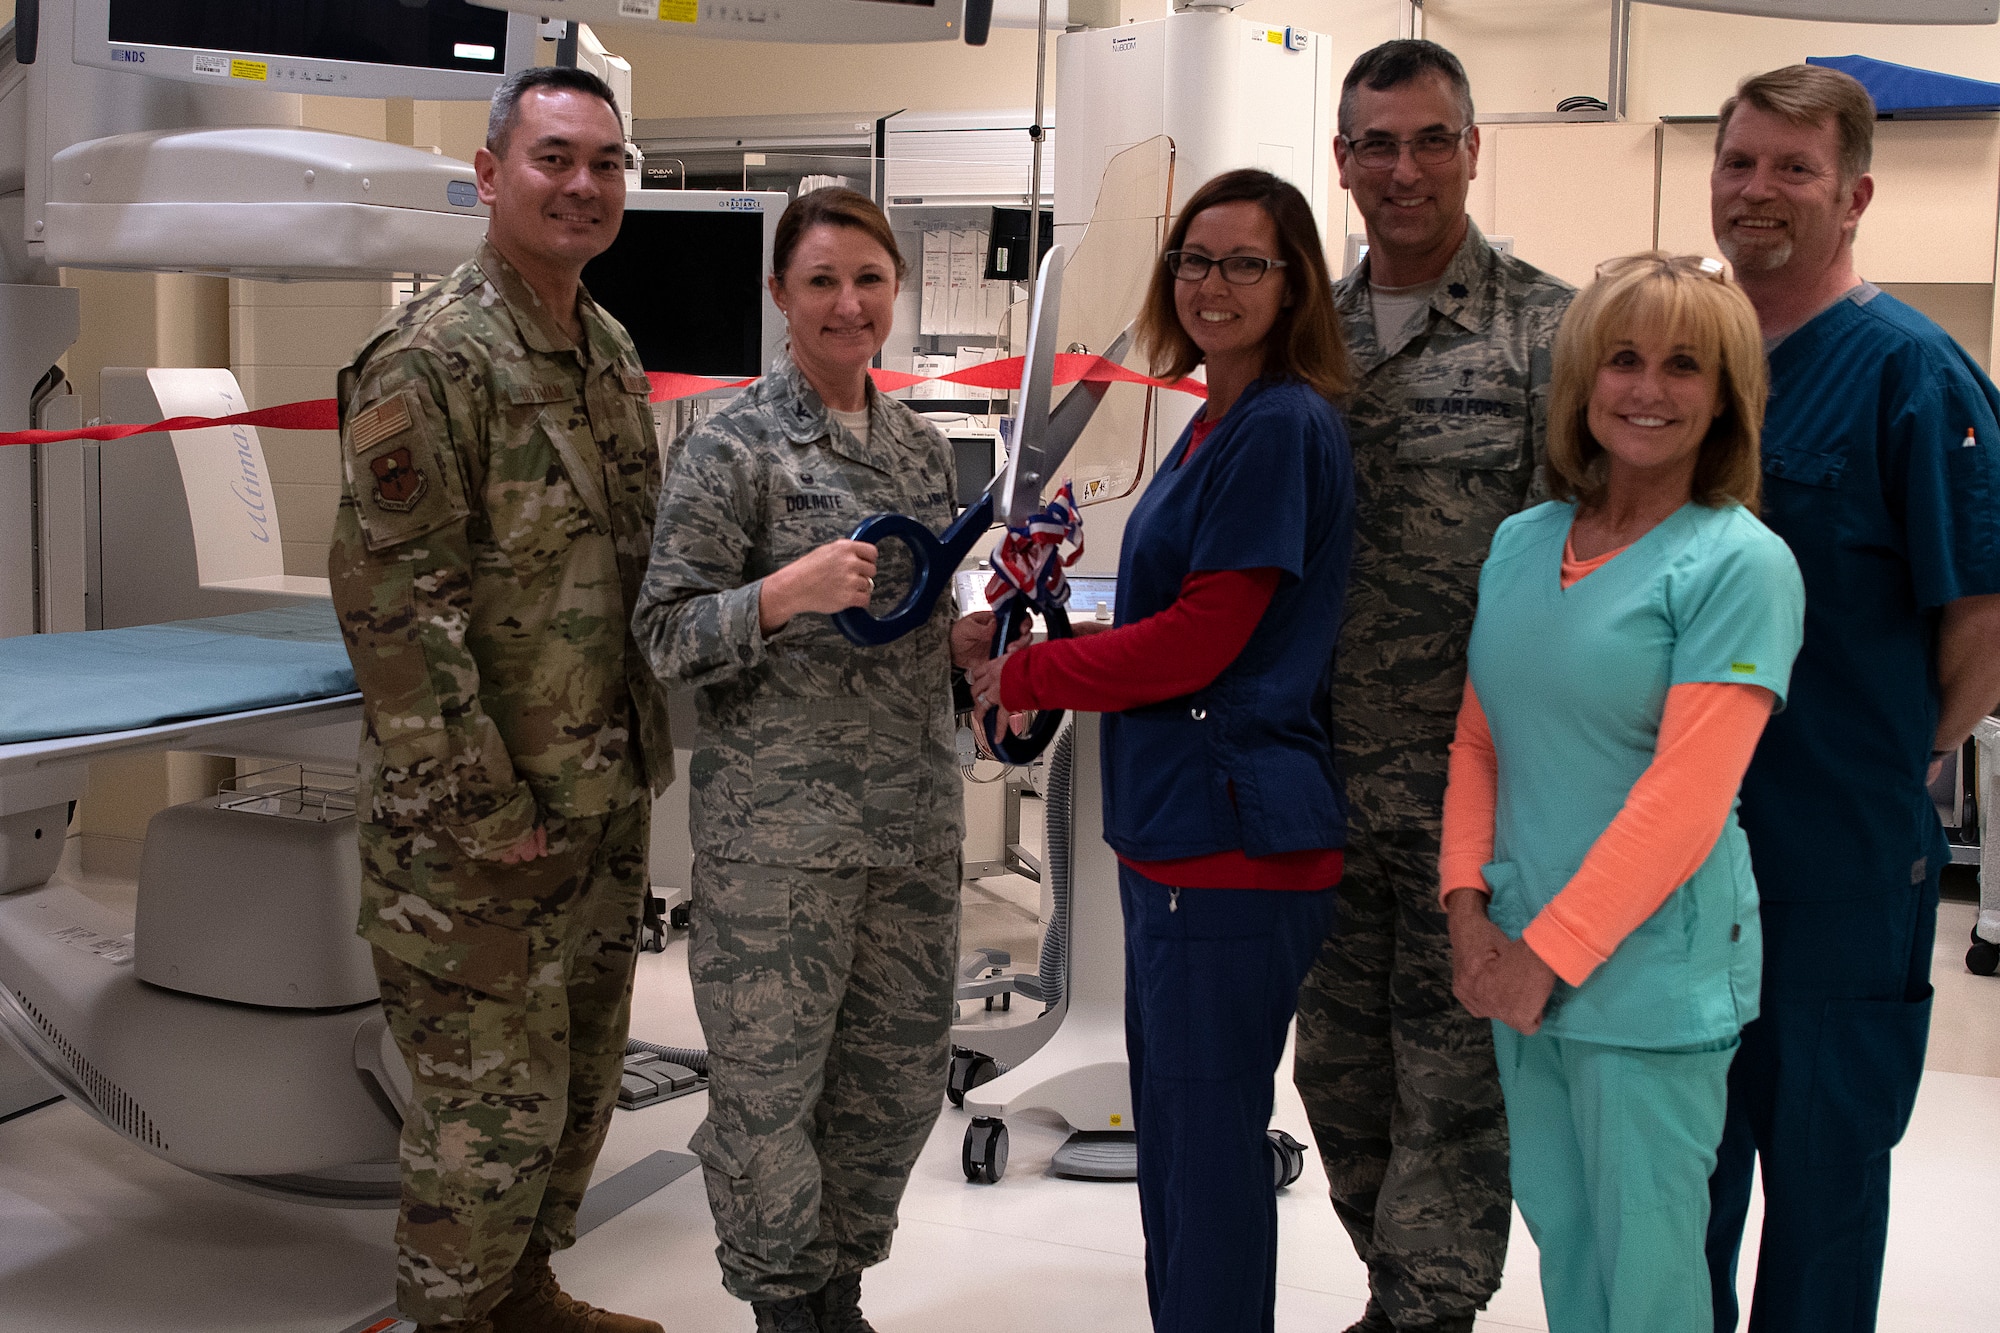 U.S. Air Force Col. Beatrice Dolihite, 81st Medical Group commander, and 81st MDG personnel participate in a ribbon cutting ceremony inside Keesler Medical Center on Keesler Air Force Base, Mississippi, April 10, 2019. The Radiology Oncology Clinic received a Positron Emission Tomography and Computer Tomography scanner as well as an Interventional Radiology Program, which will improve patient care. (U.S. Air Force photo by Senior Airman Suzie Plotnikov)